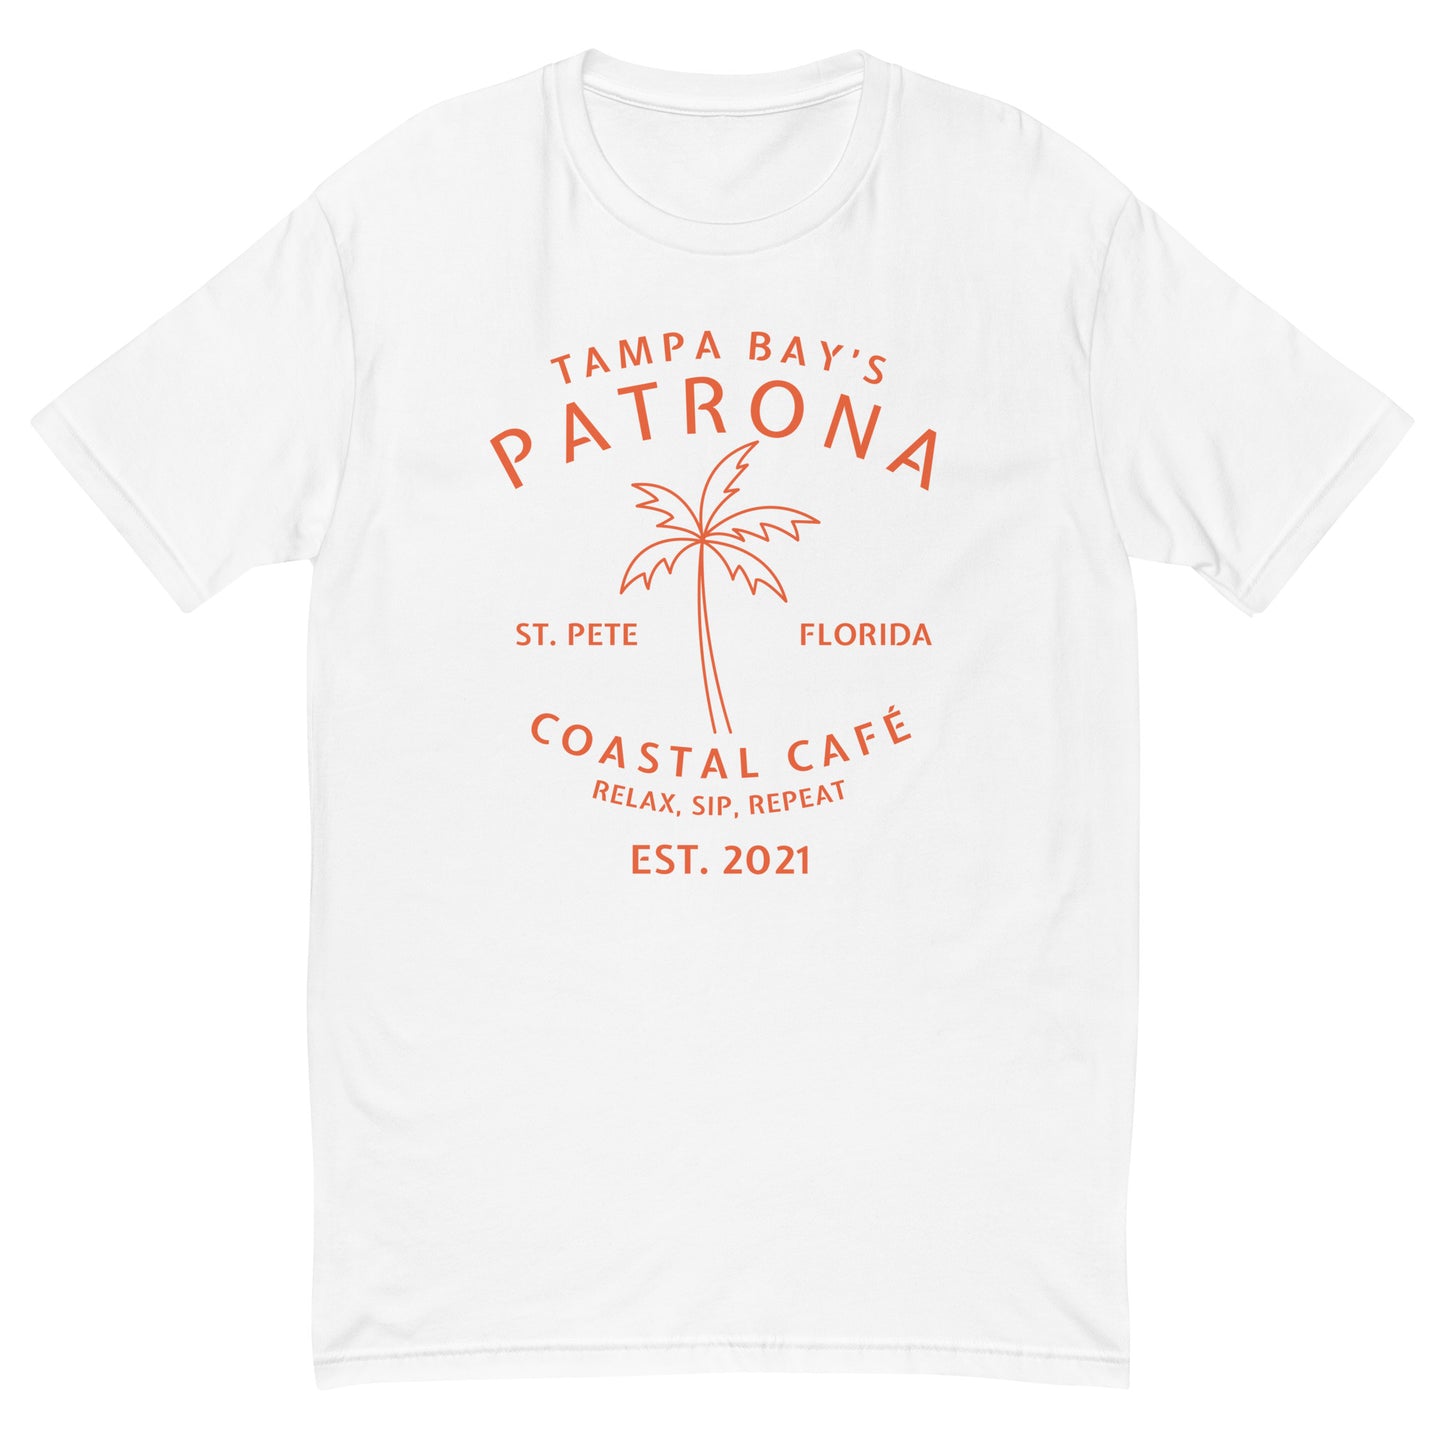 Patrona Palm Tree Premium Fitted-Style Tee Shirt